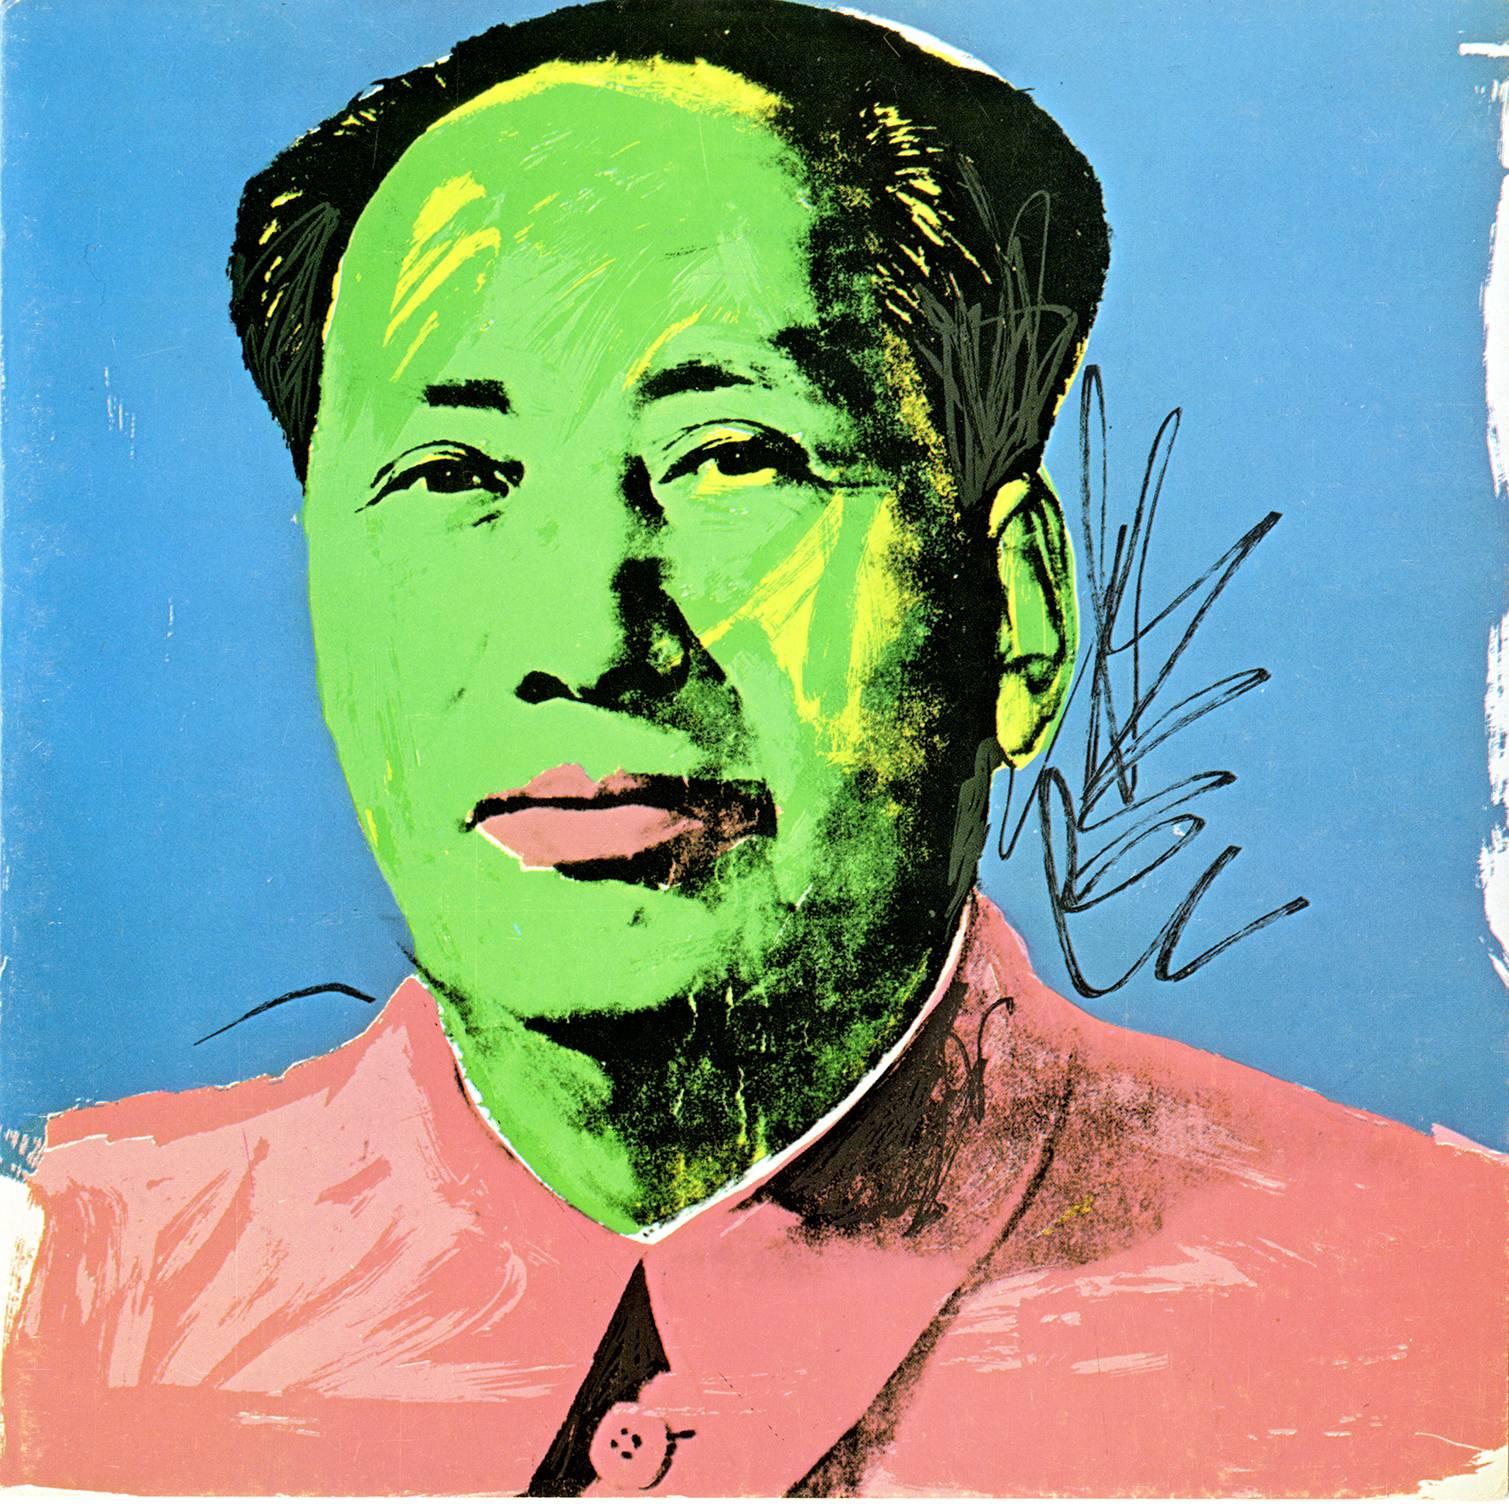 Andy Warhol Mao 1972 announcement (Andy Warhol Leo Castelli gallery)  - Art by (after) Andy Warhol